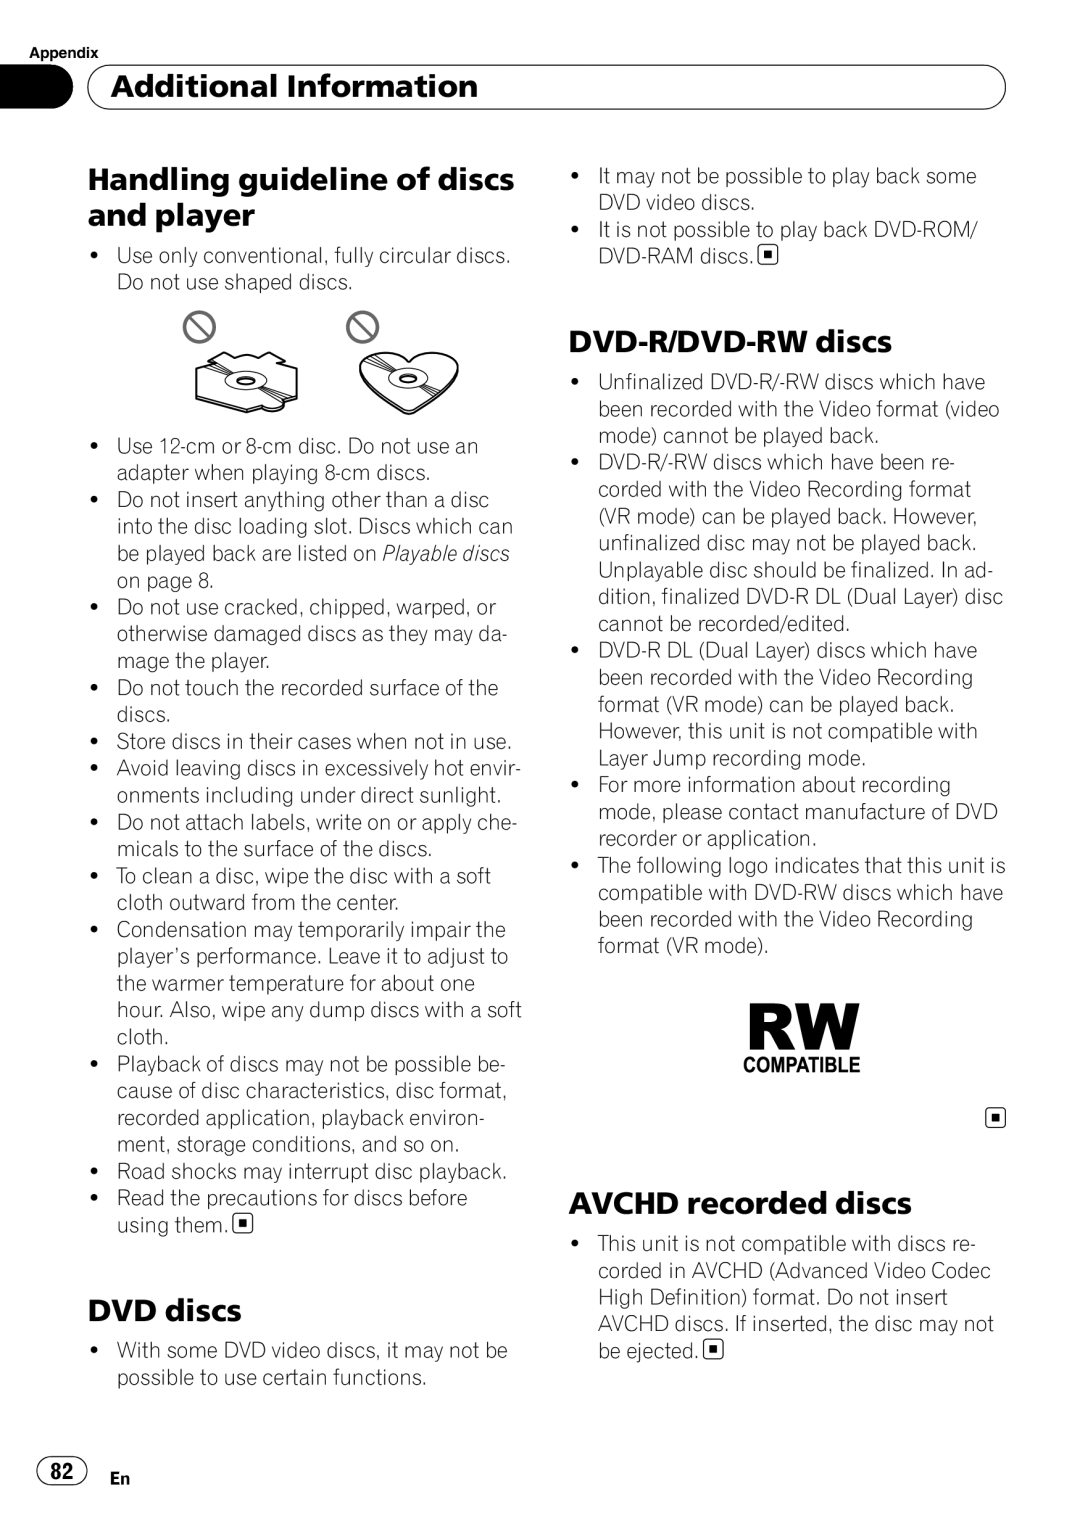 Pioneer AVH-P4050DVD Handling guideline of discs, and player, DVD discs, DVD-R/DVD-RWdiscs, AVCHD recorded discs 